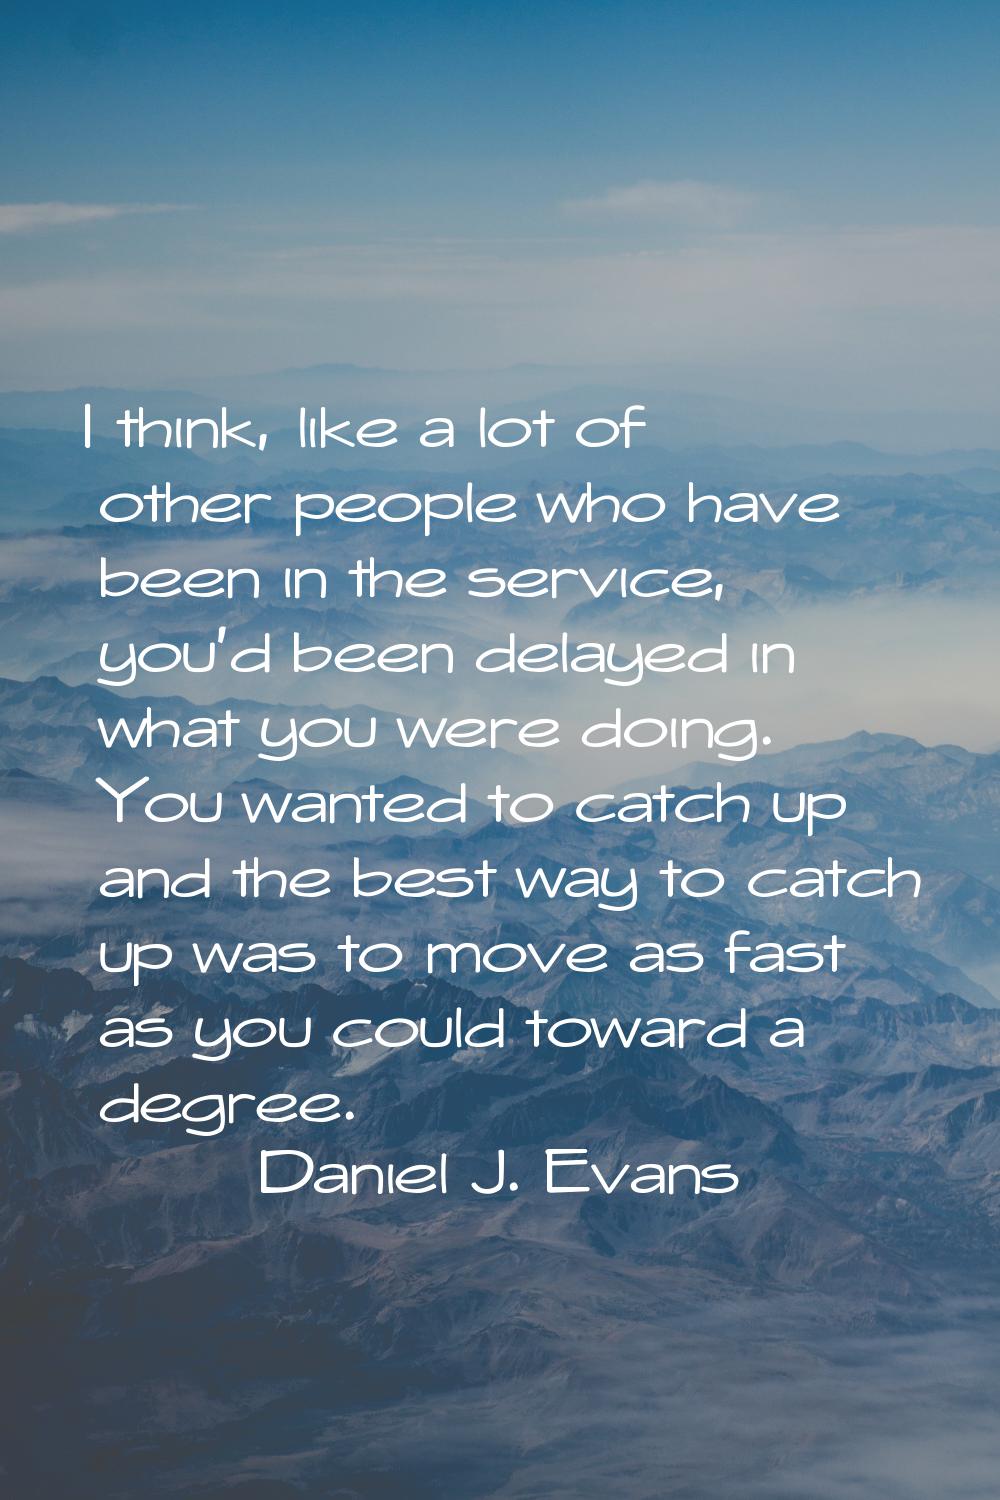 I think, like a lot of other people who have been in the service, you'd been delayed in what you we